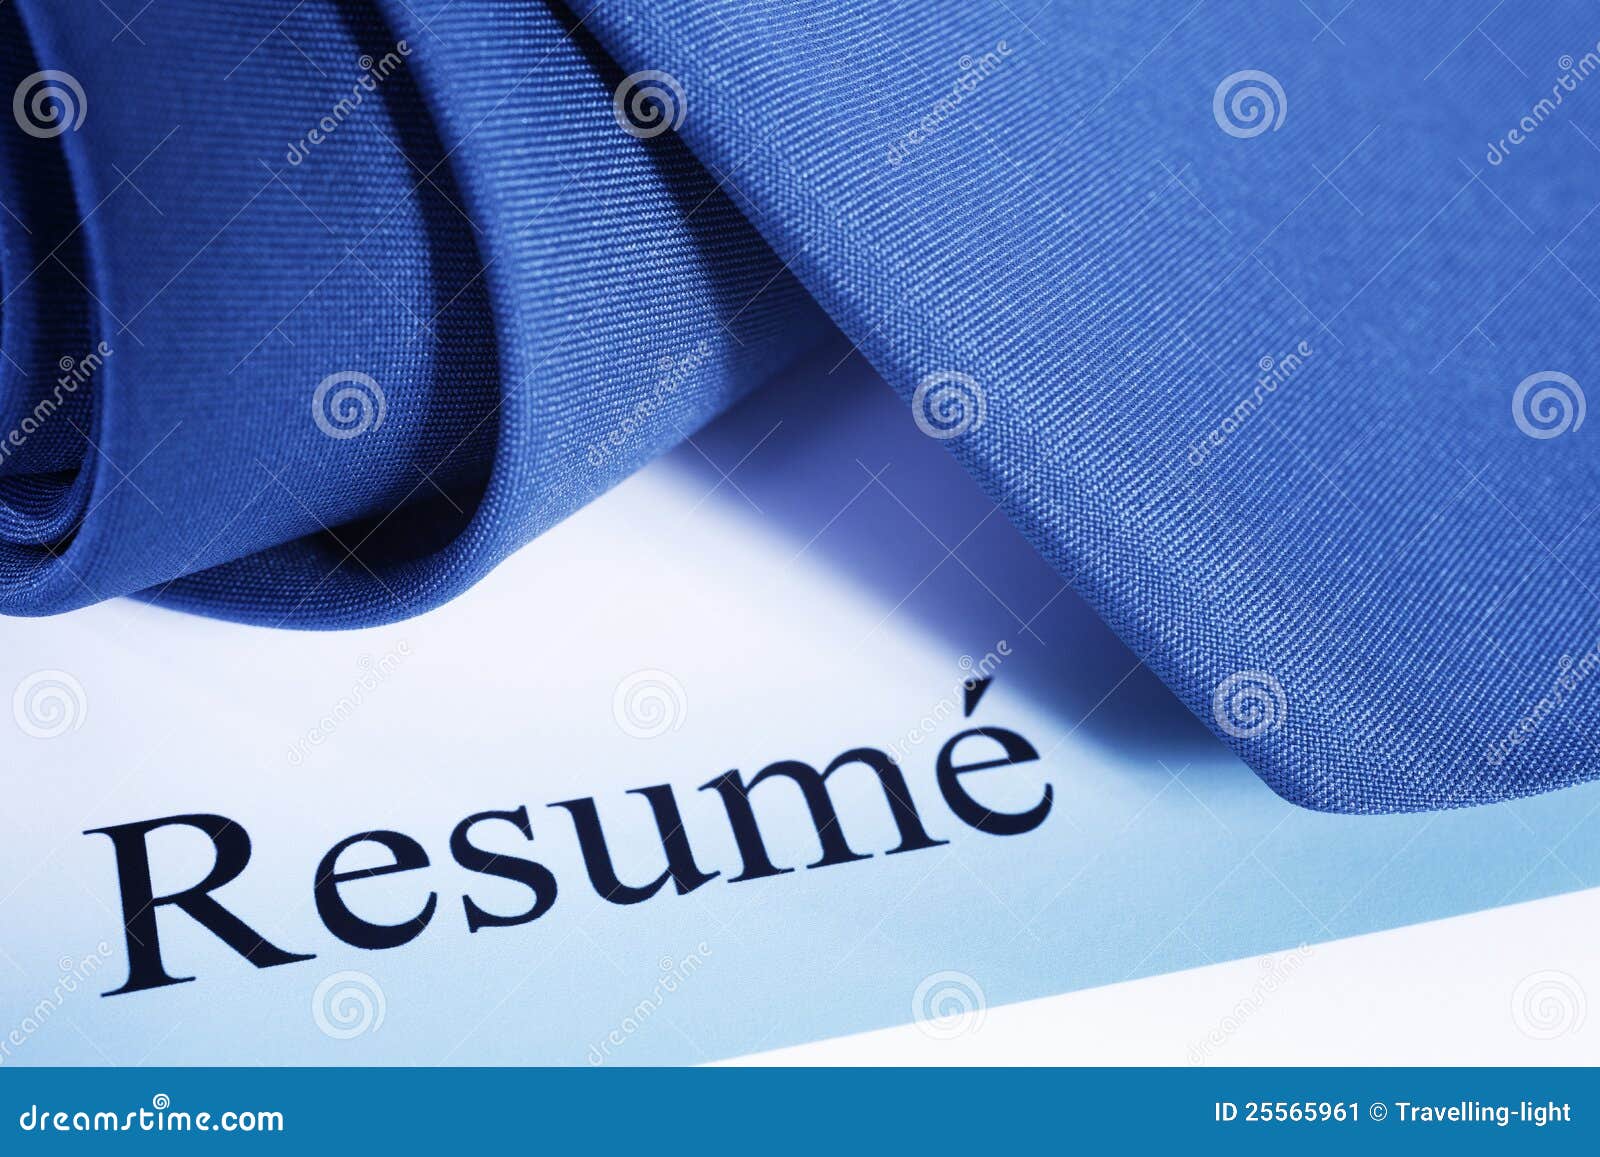 clipart on resume - photo #48